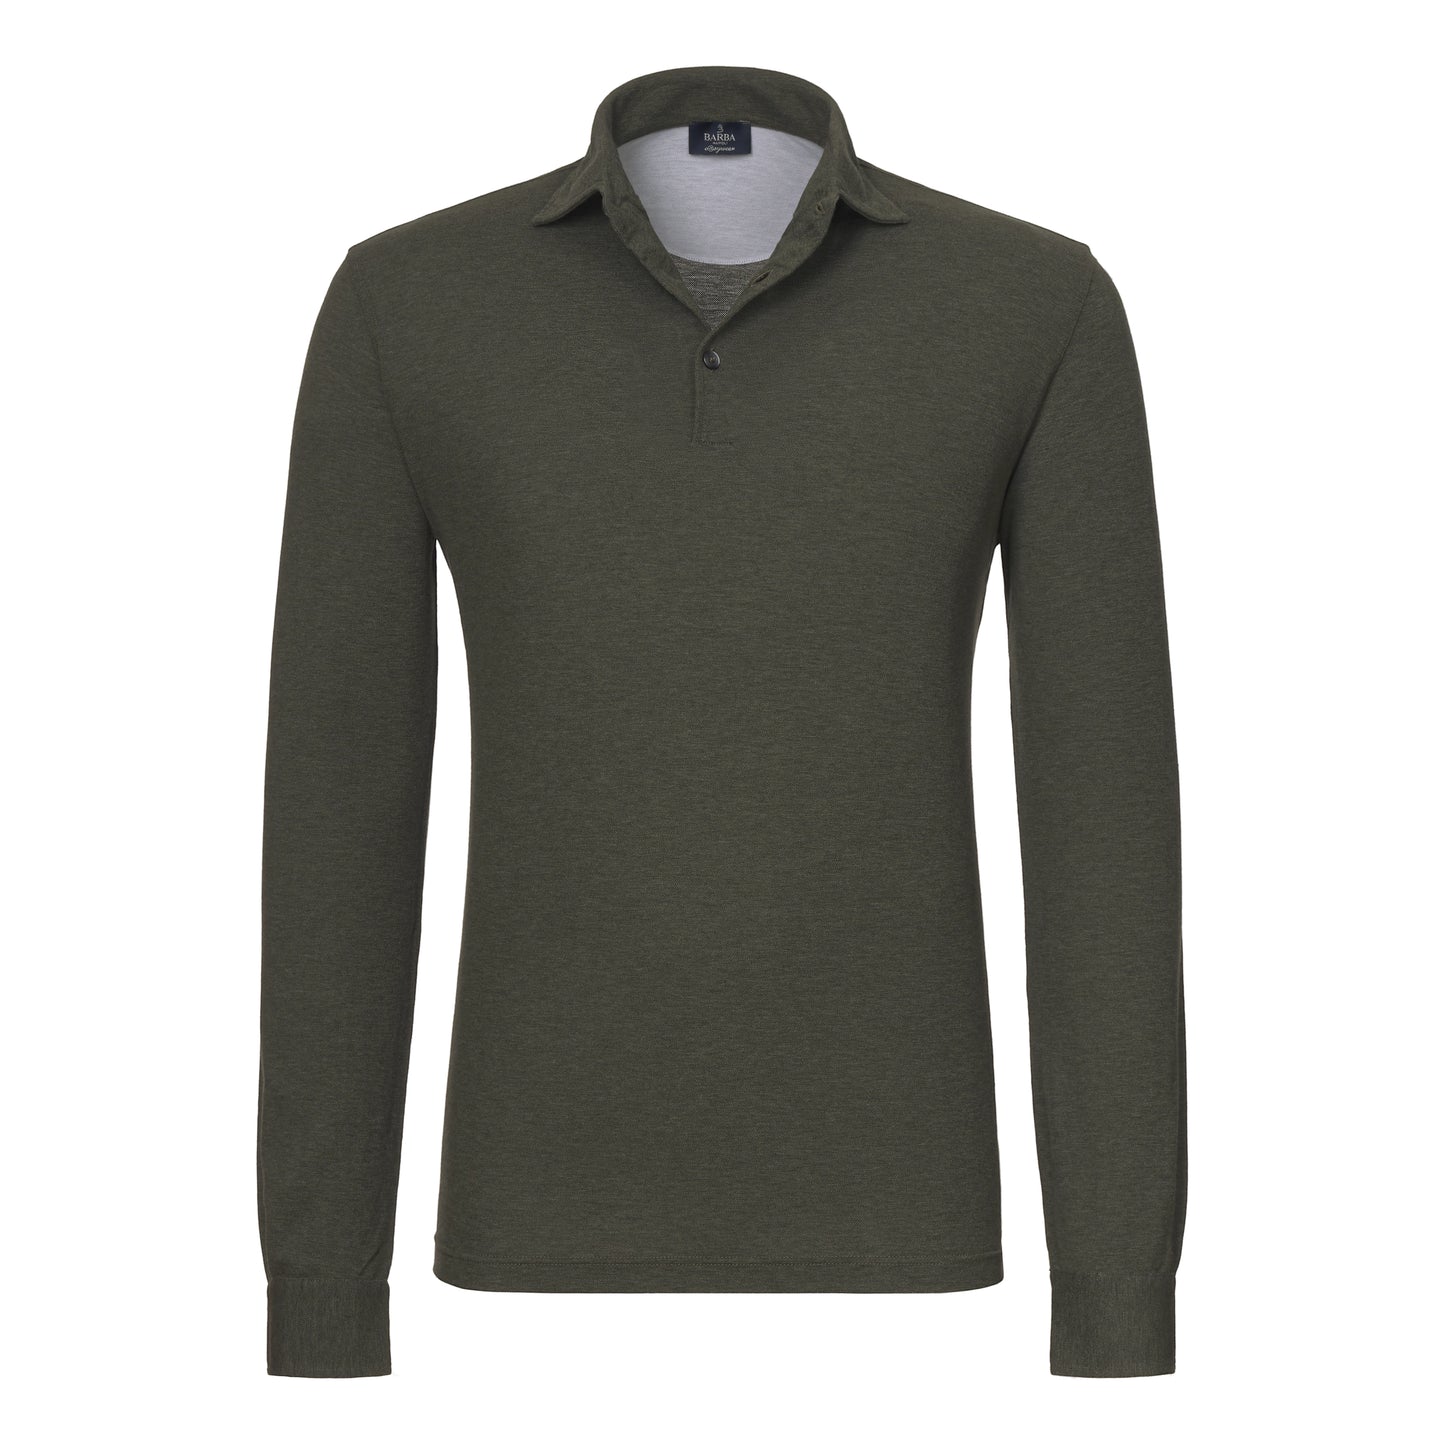 Cotton Polo Shirt in Green Melange with Long Sleeves